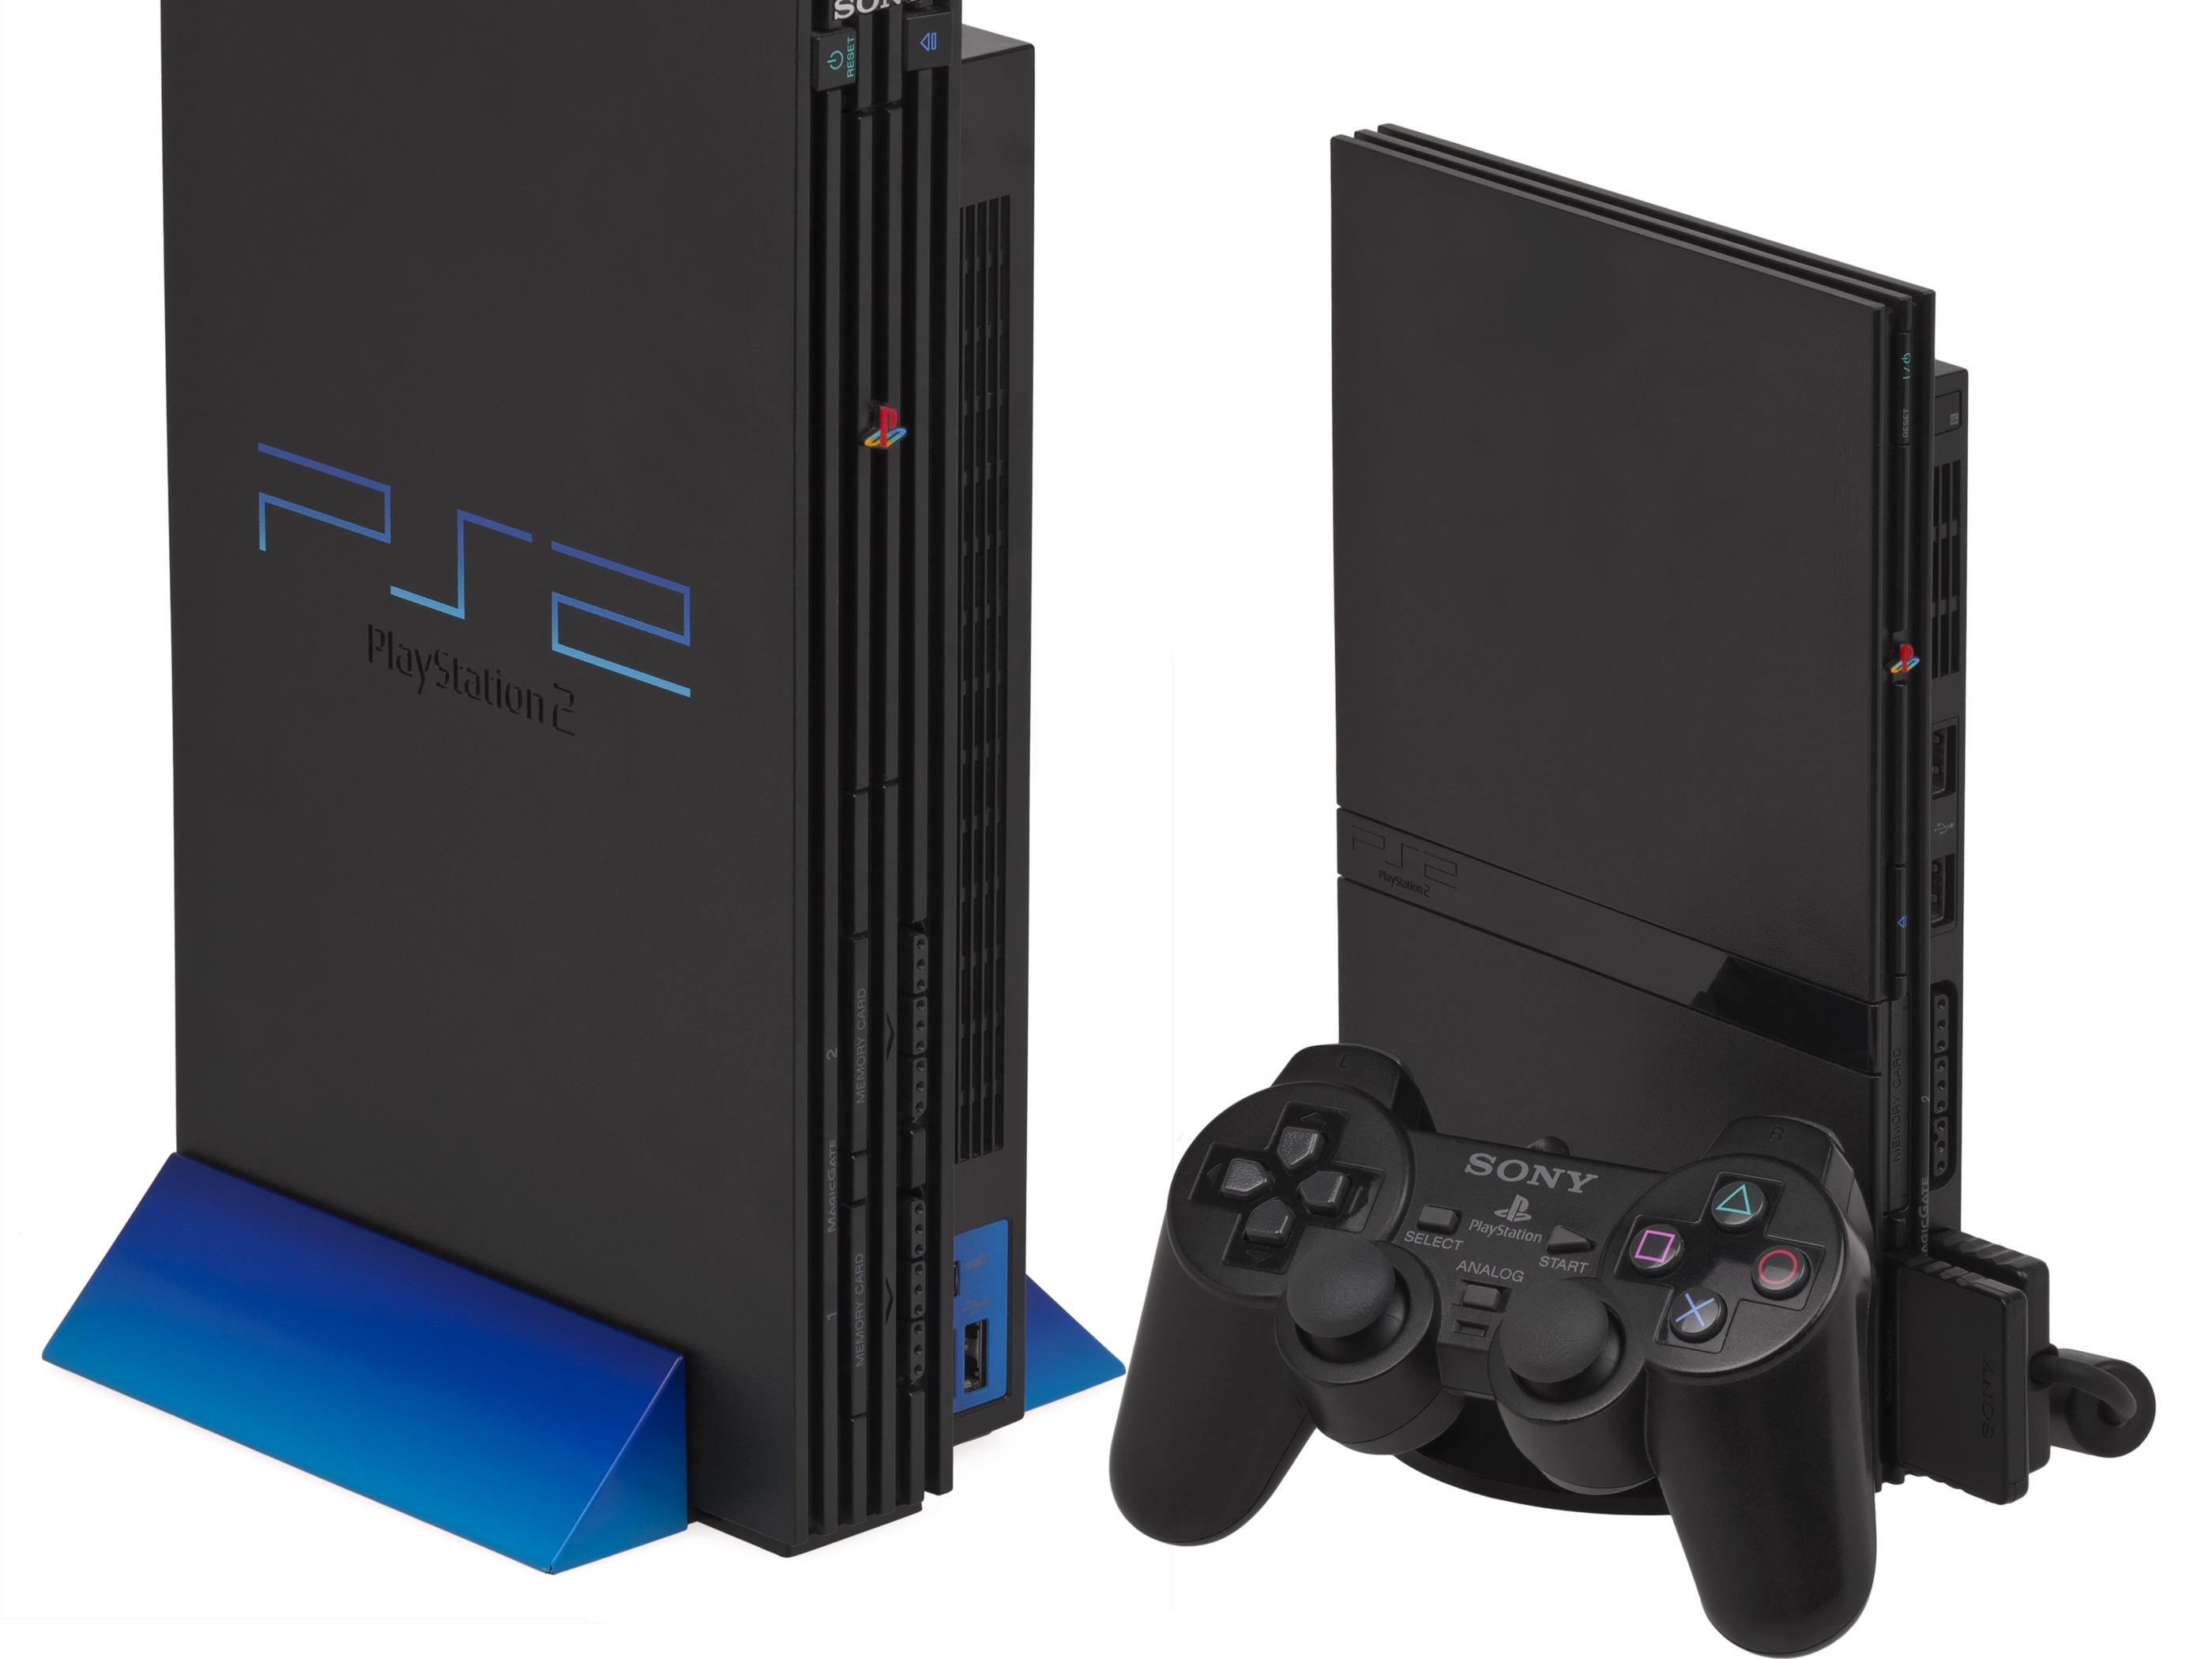 Video Game Playstation 2 HD Wallpaper | Background Image